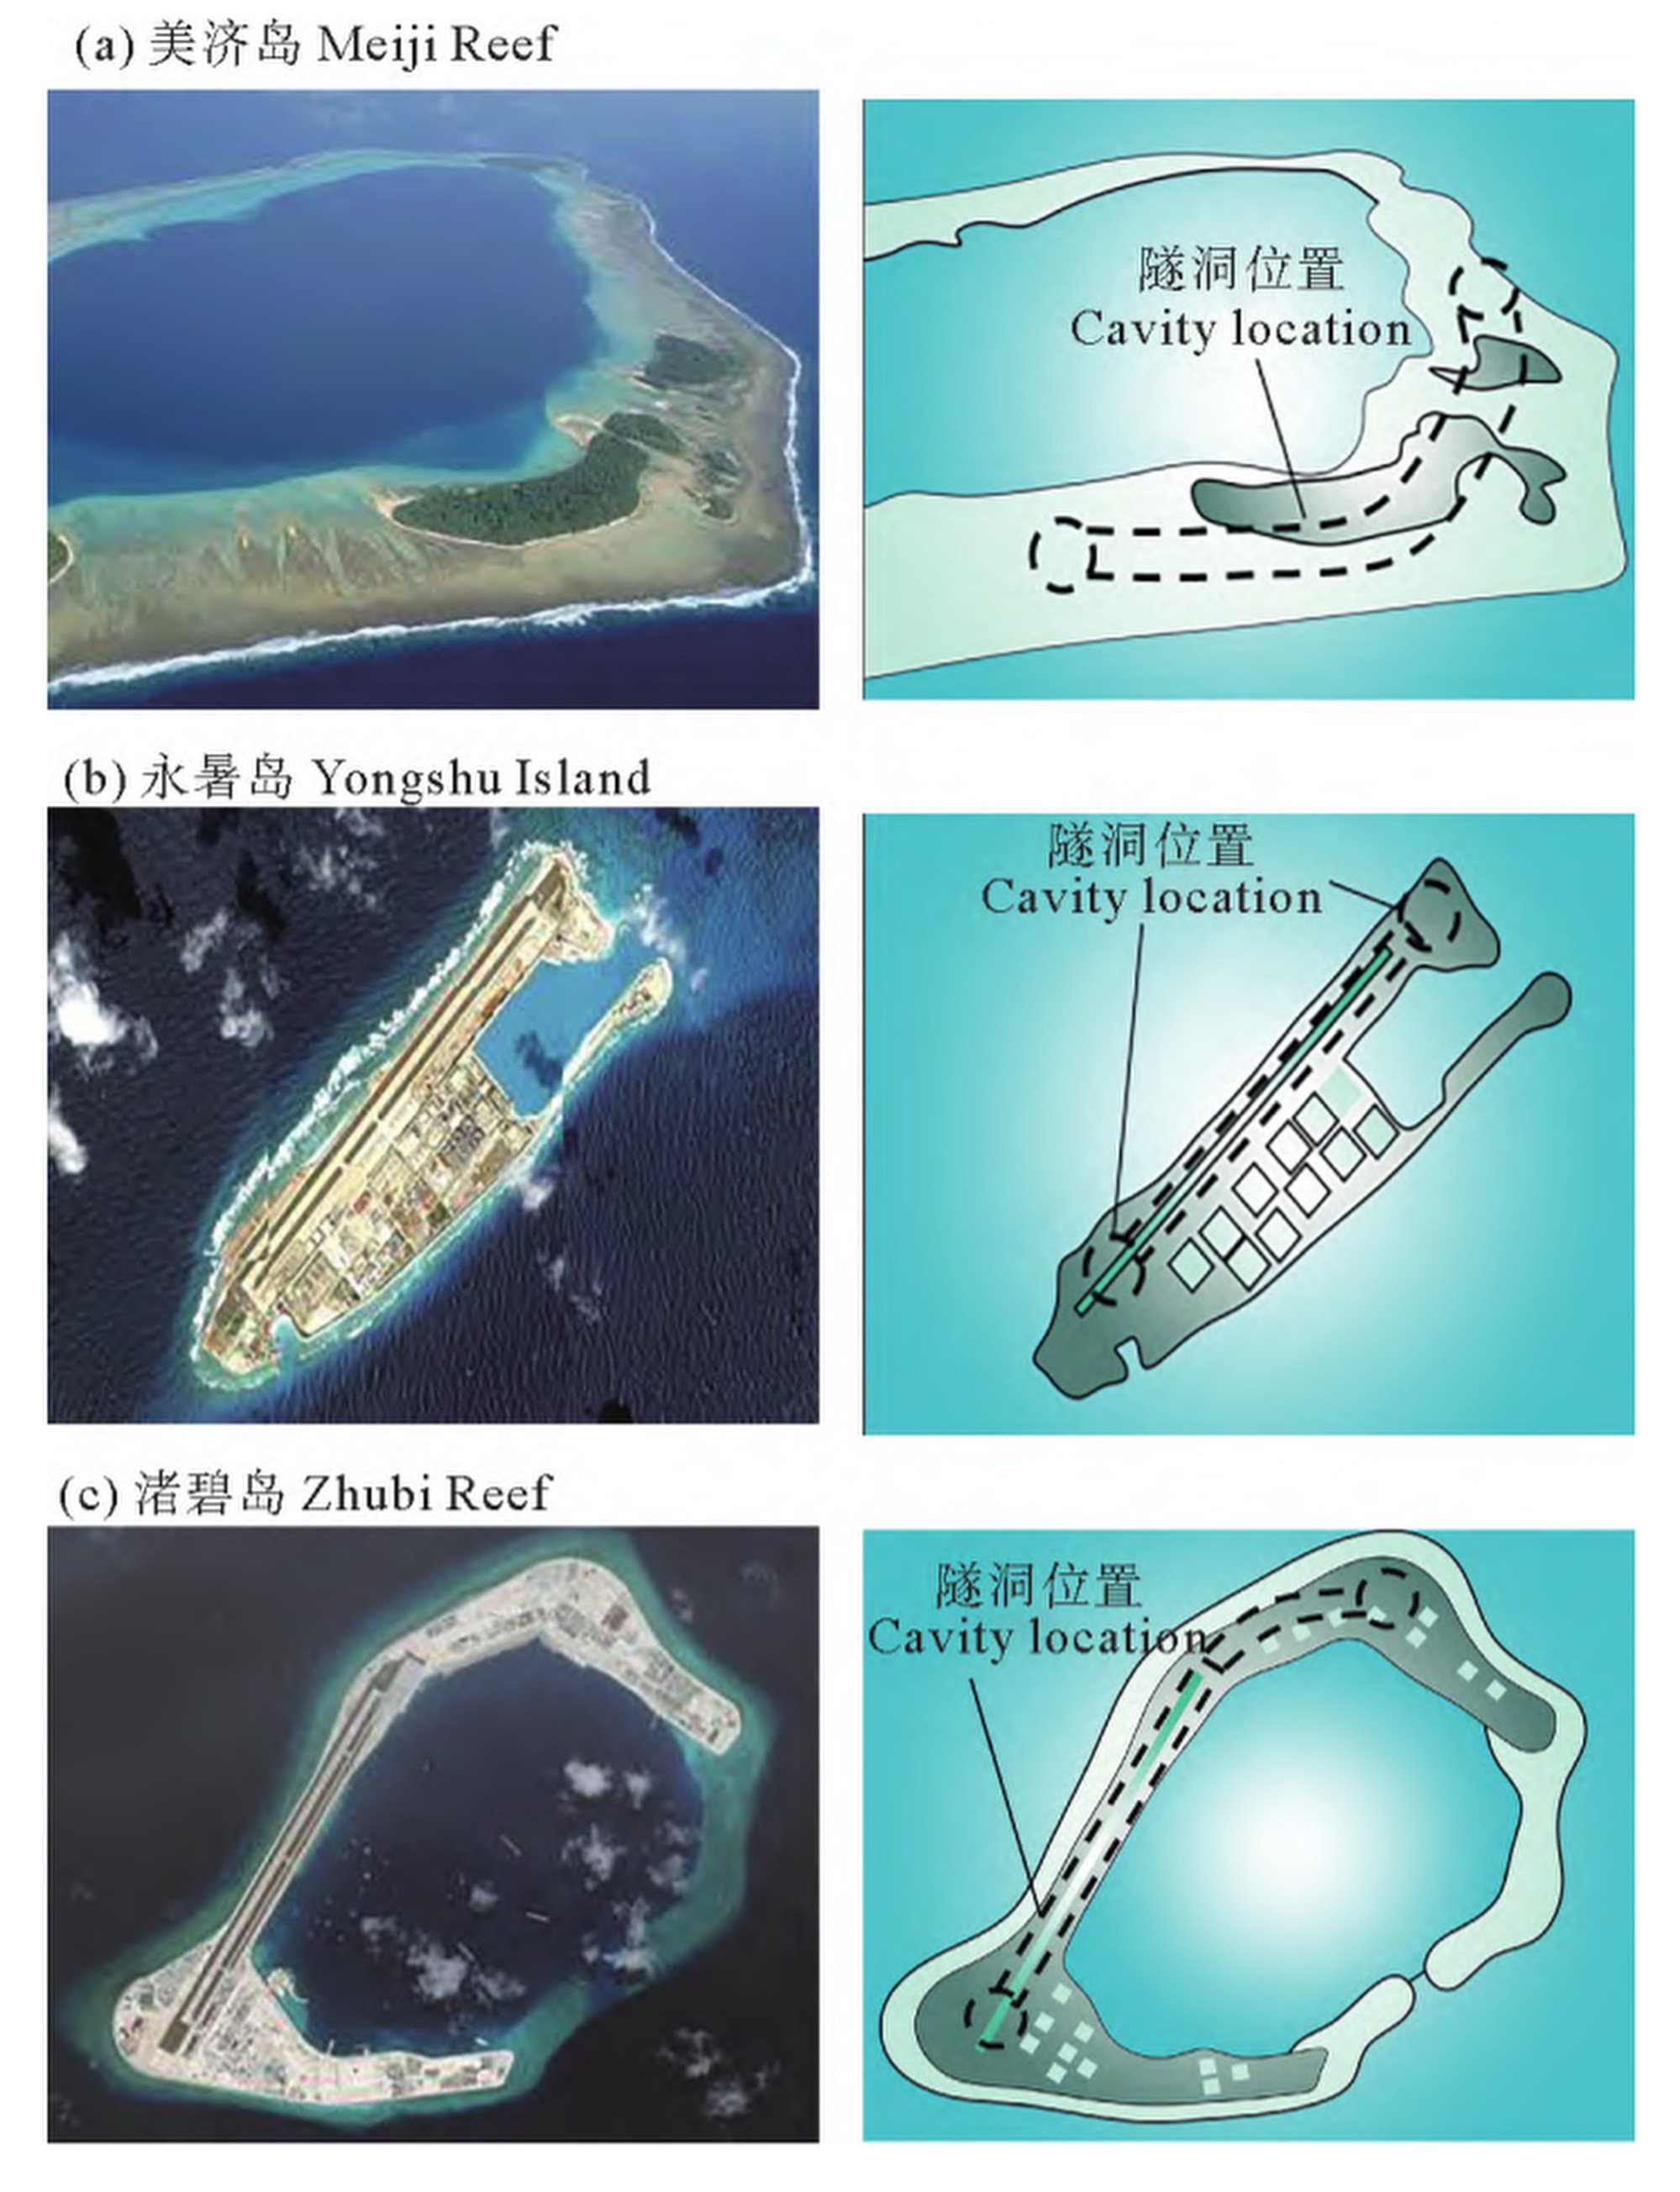 The Chinese researchers included preliminary construction plans for tunnels on the three largest islands in the Spratly chain but stressed they were not intended as blueprints. Illustration: Ocean University of China